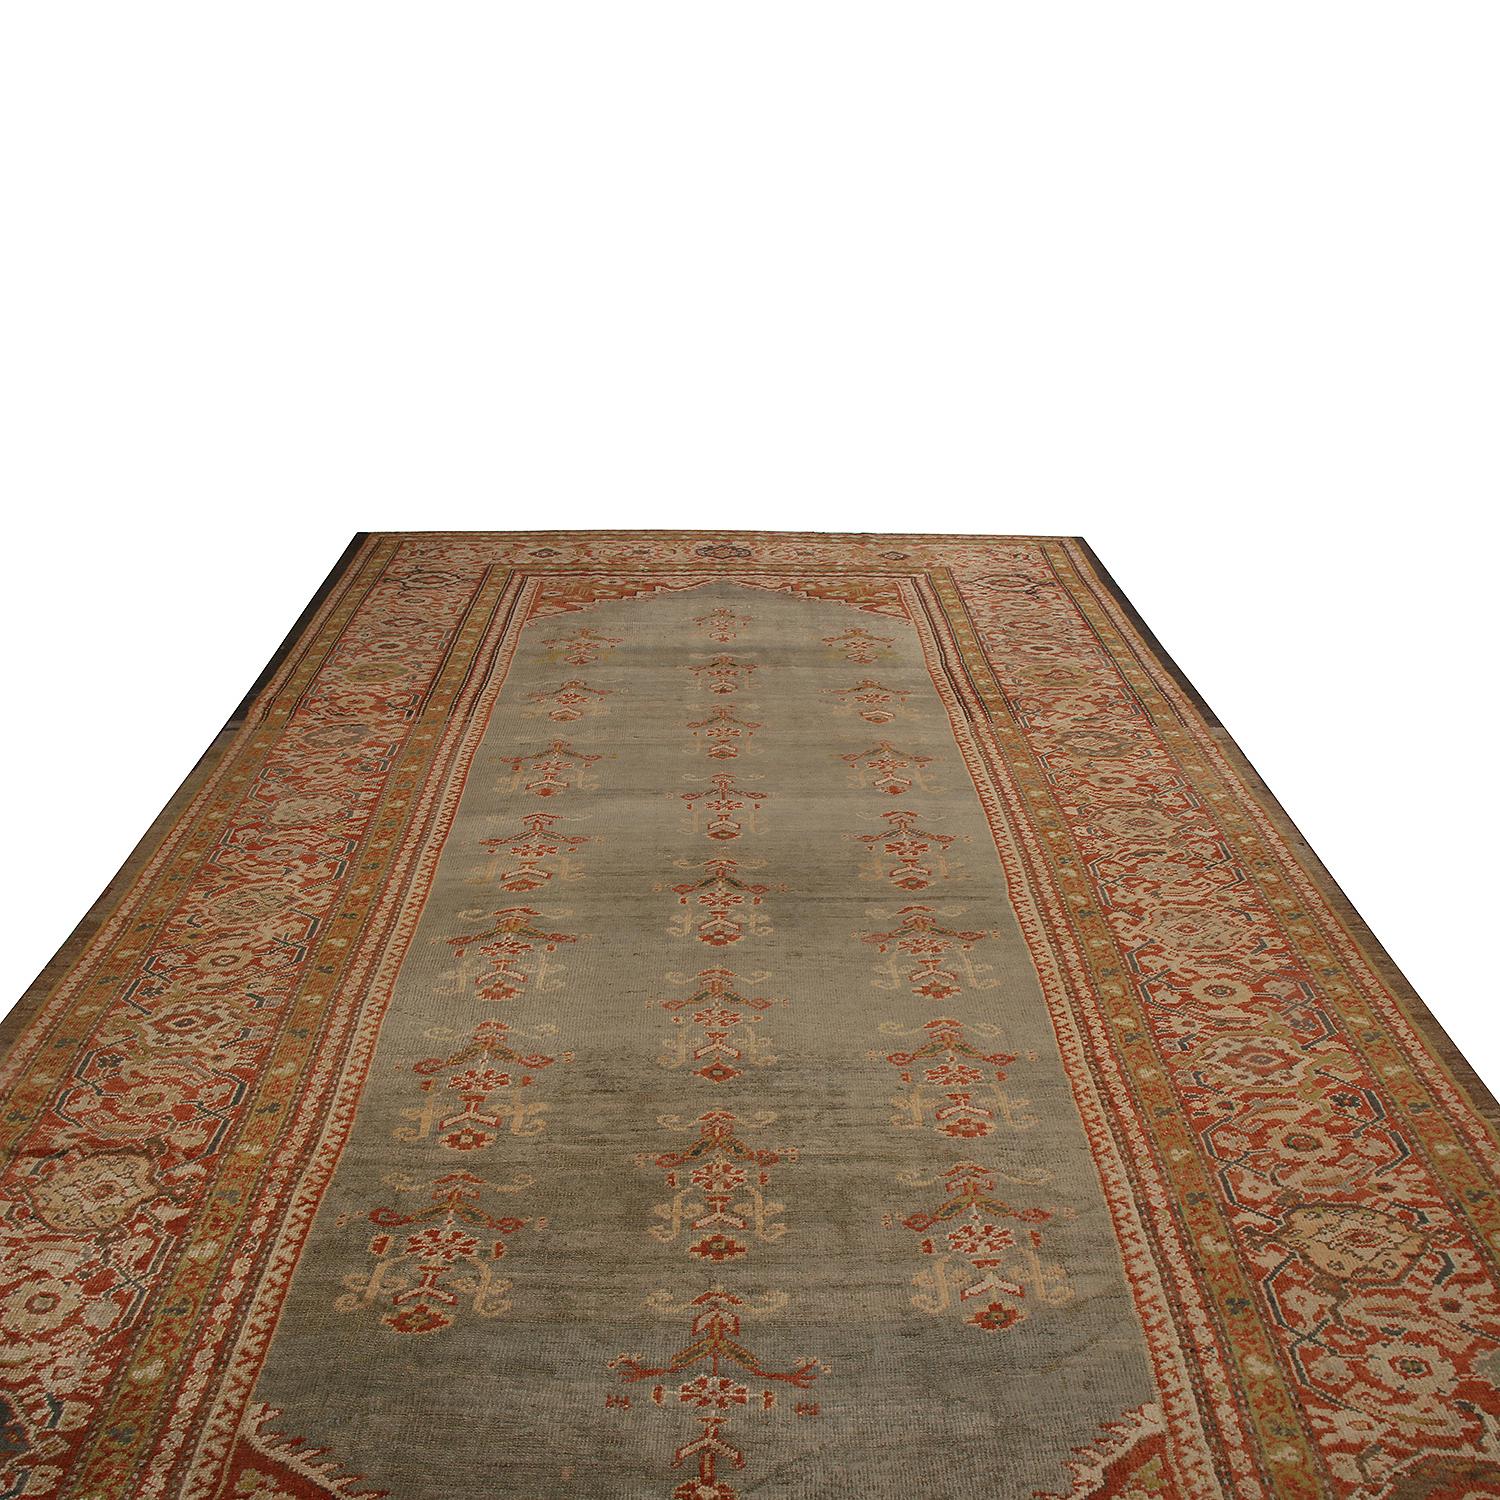 Hand knotted in Persia originating between 1880-1890, this antique Sultanabad Persian rug enjoys a rare abrashed blue background seldom seen in this design family, a bright contrast to the soft but intricate marriage of burgundy and golden-brown